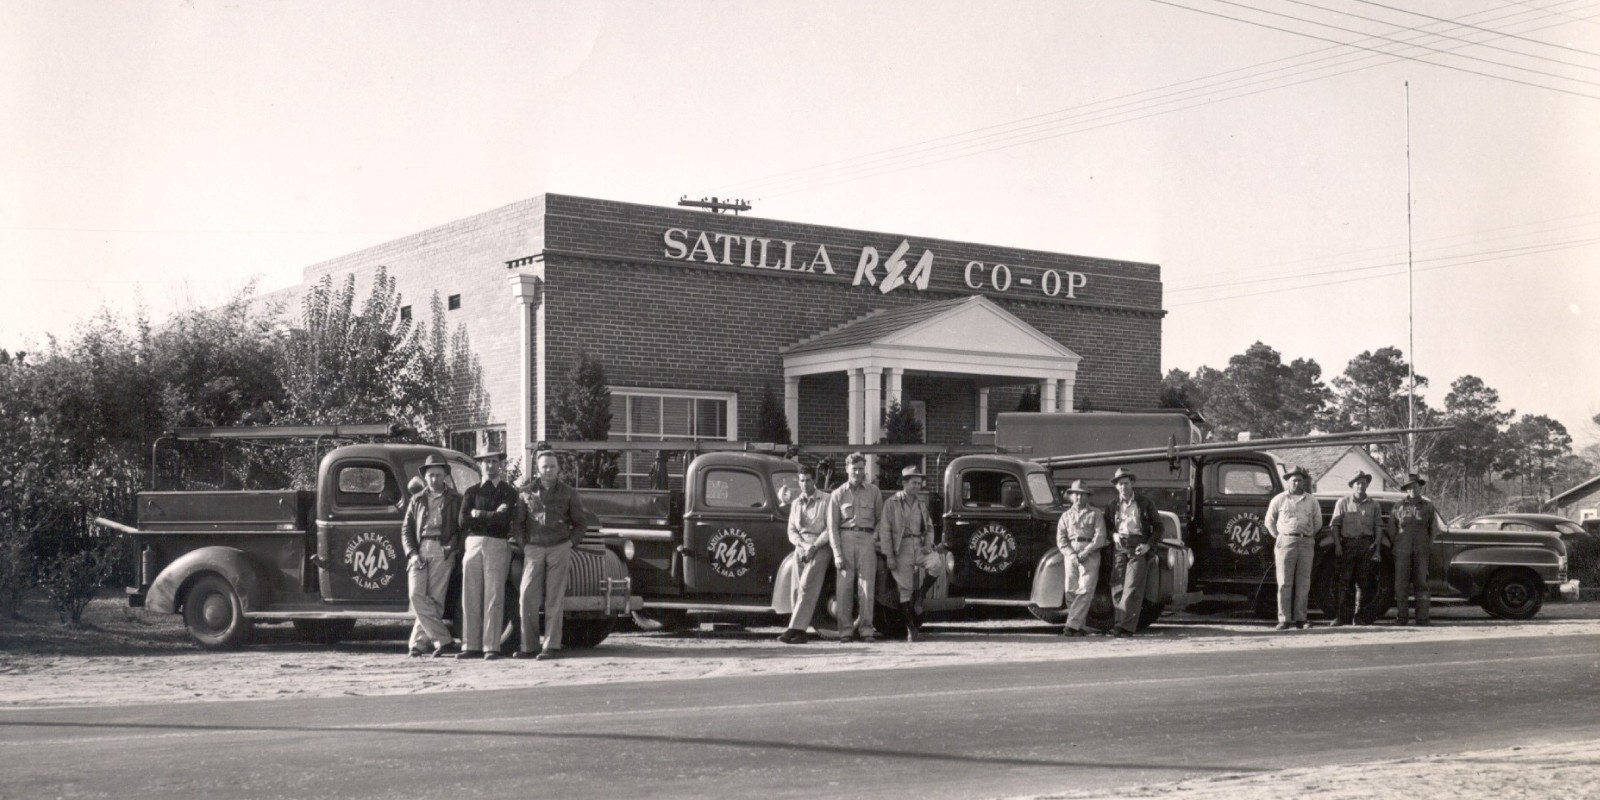 The Satilla REMC has been proudly providing rural electric service since 1937.